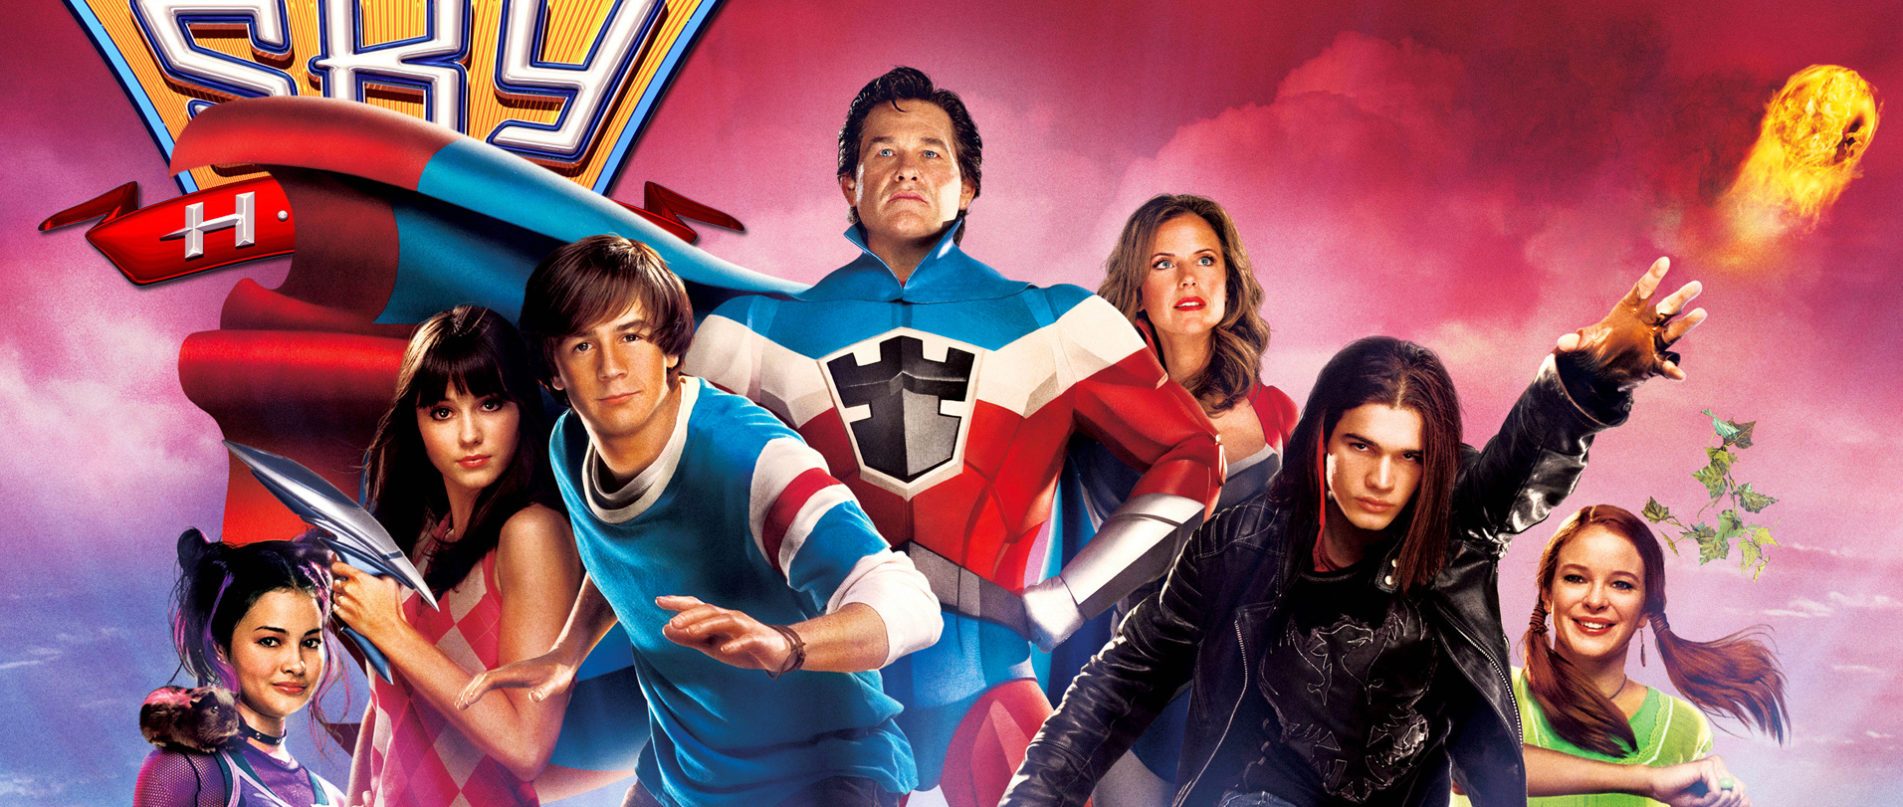 Why Sky High is the Greatest {Superhero Movie} Ever Made - The